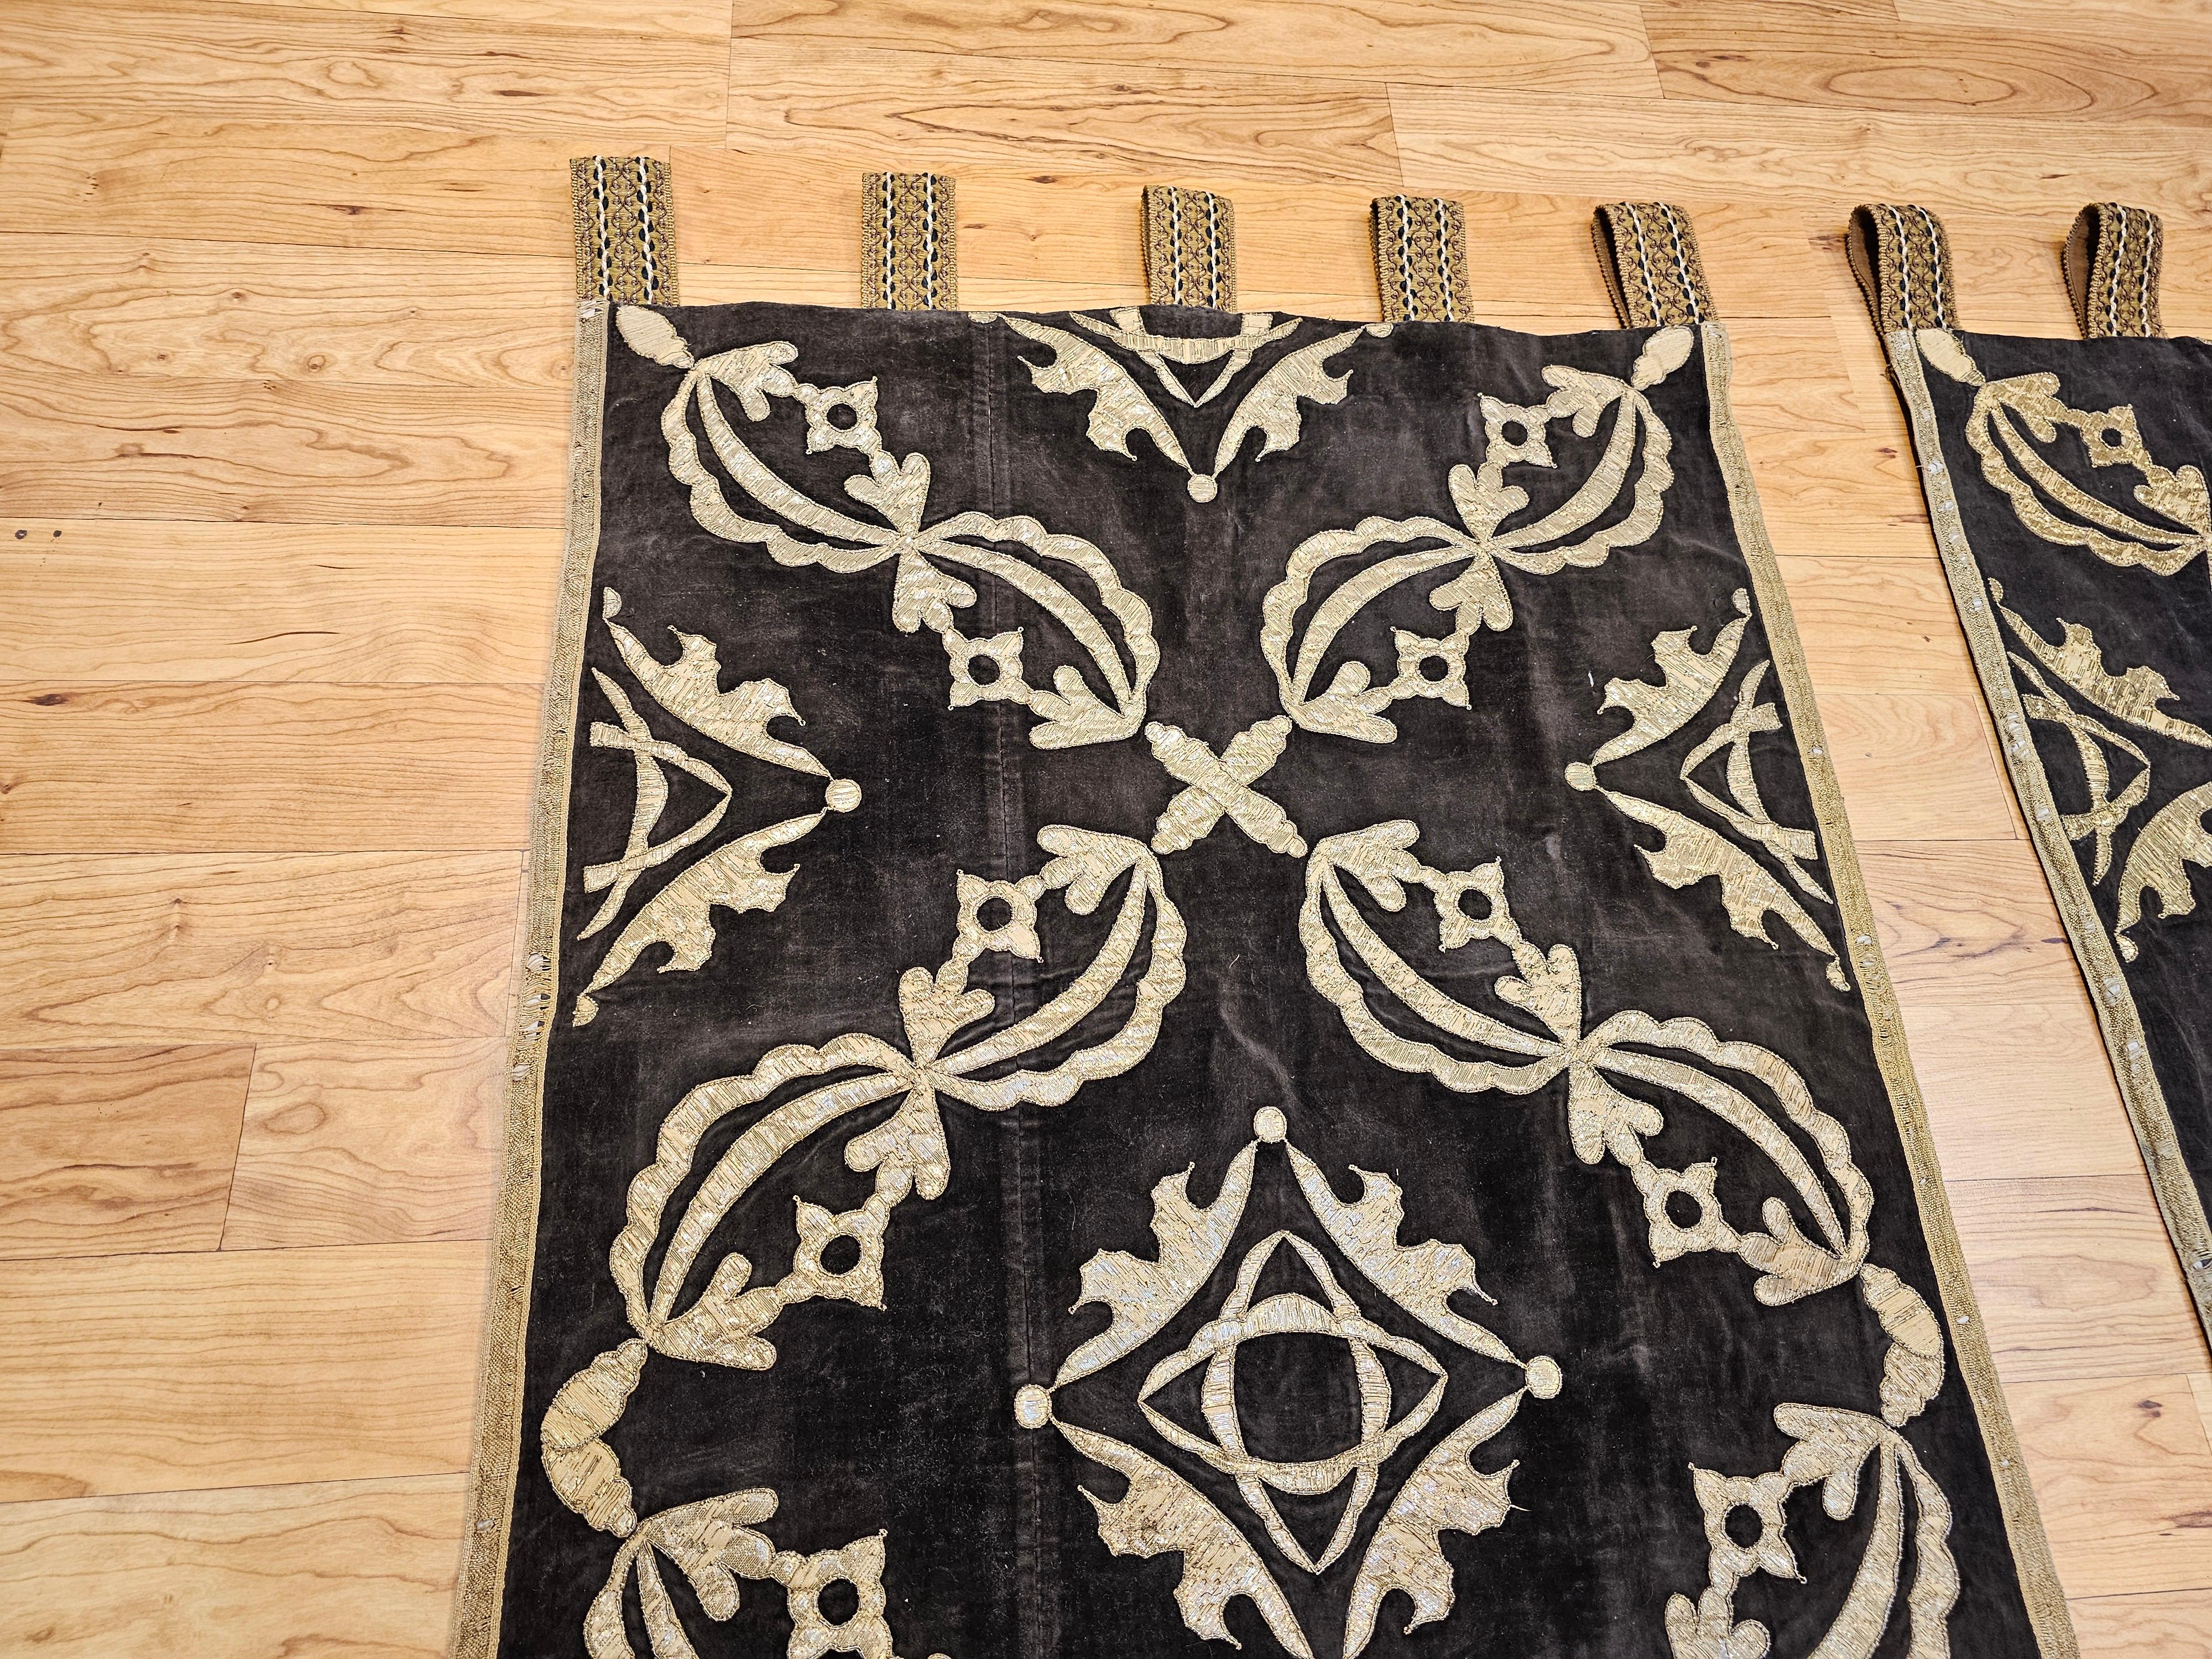 18th Century Ottoman Gilt Threads Brocade Embroidery Textile Panels (A Pair) In Good Condition For Sale In Barrington, IL